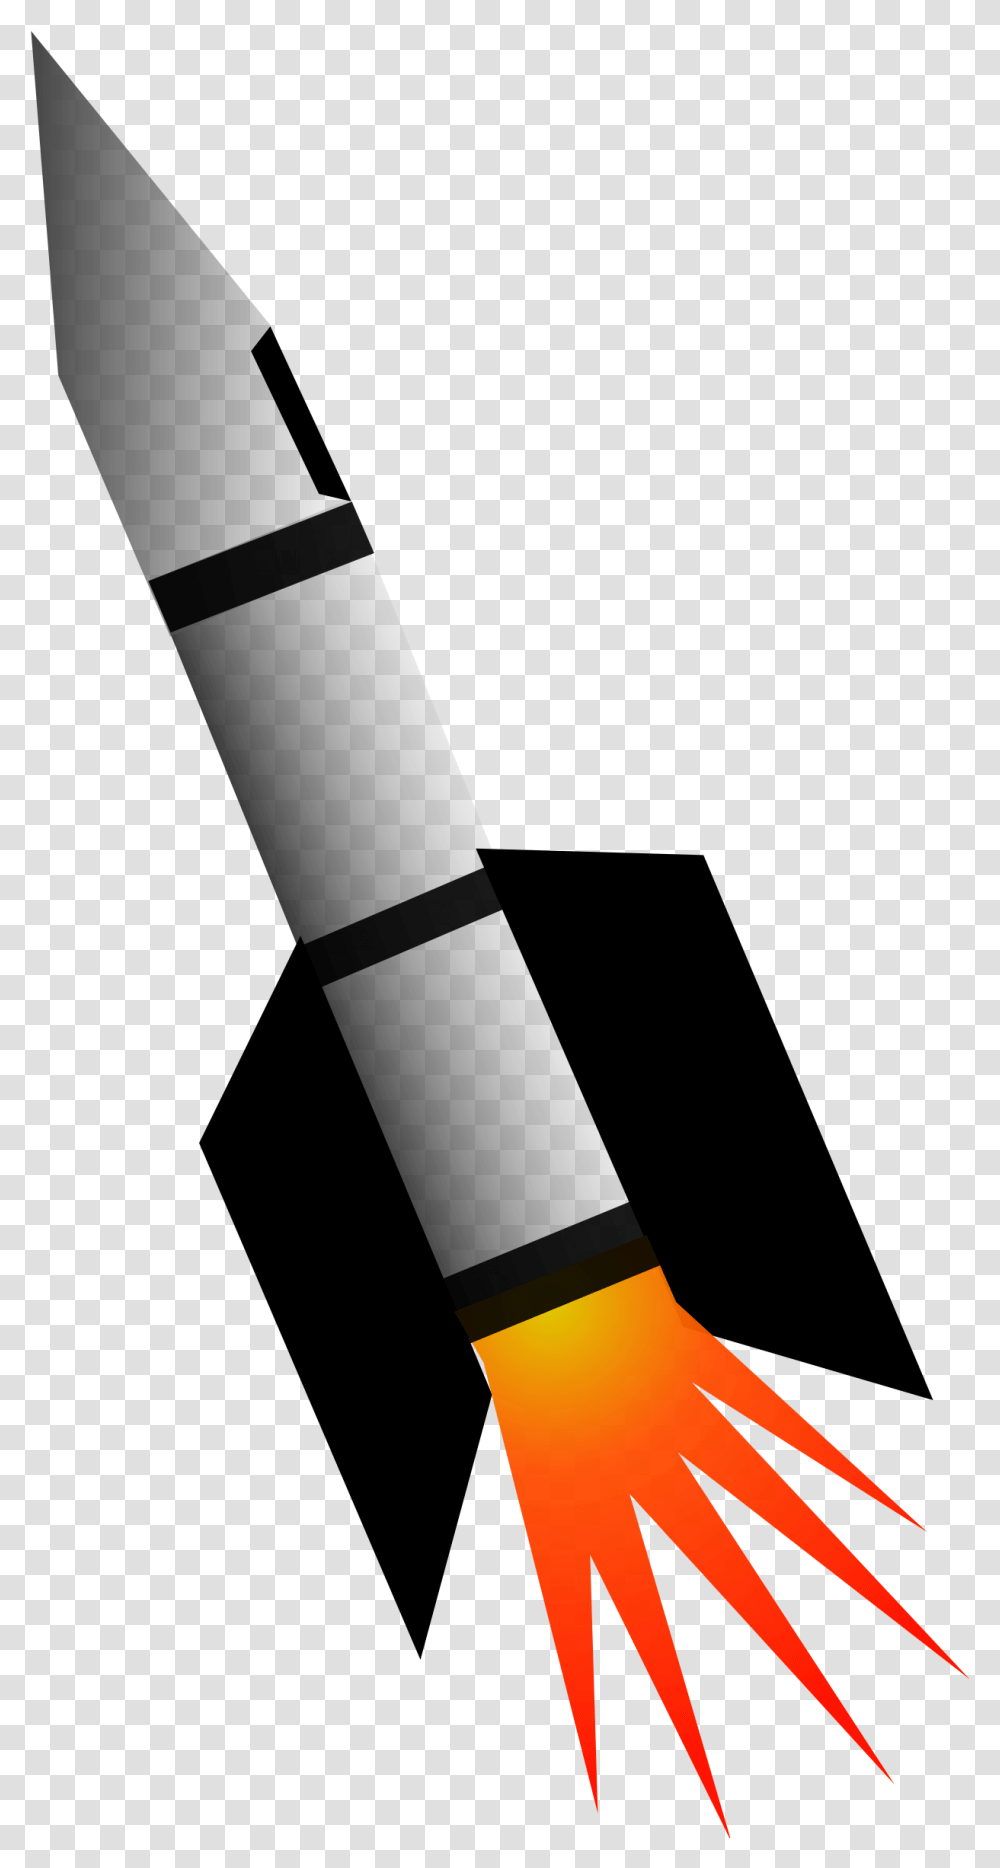 This Free Icons Design Of The Rocket Download Rocket Missile Clip Art, Weapon, Weaponry, Photography, Bomb Transparent Png